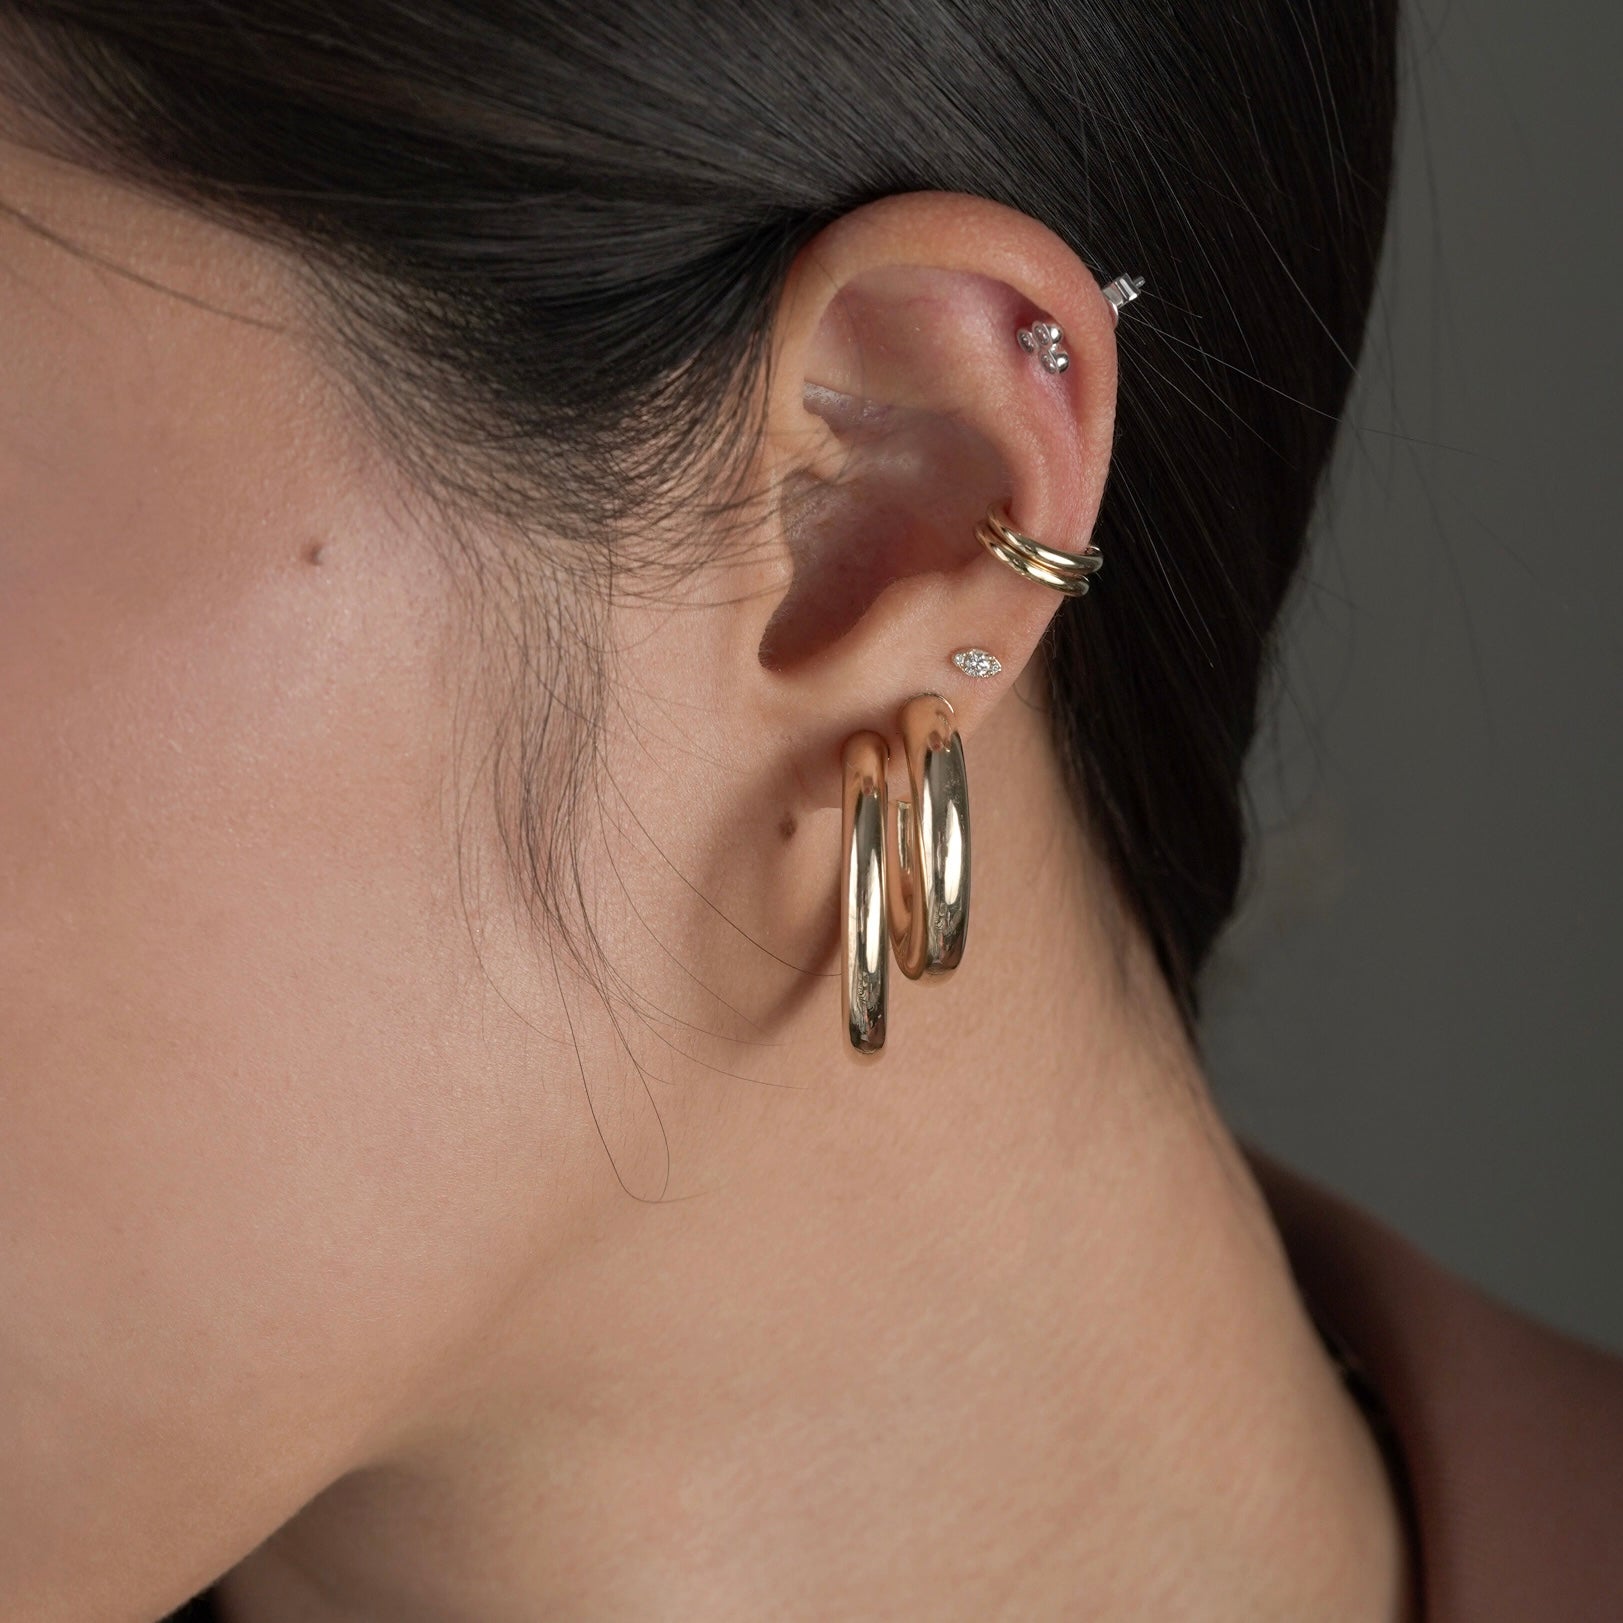 14k Hollow Hoop Earring With A Post